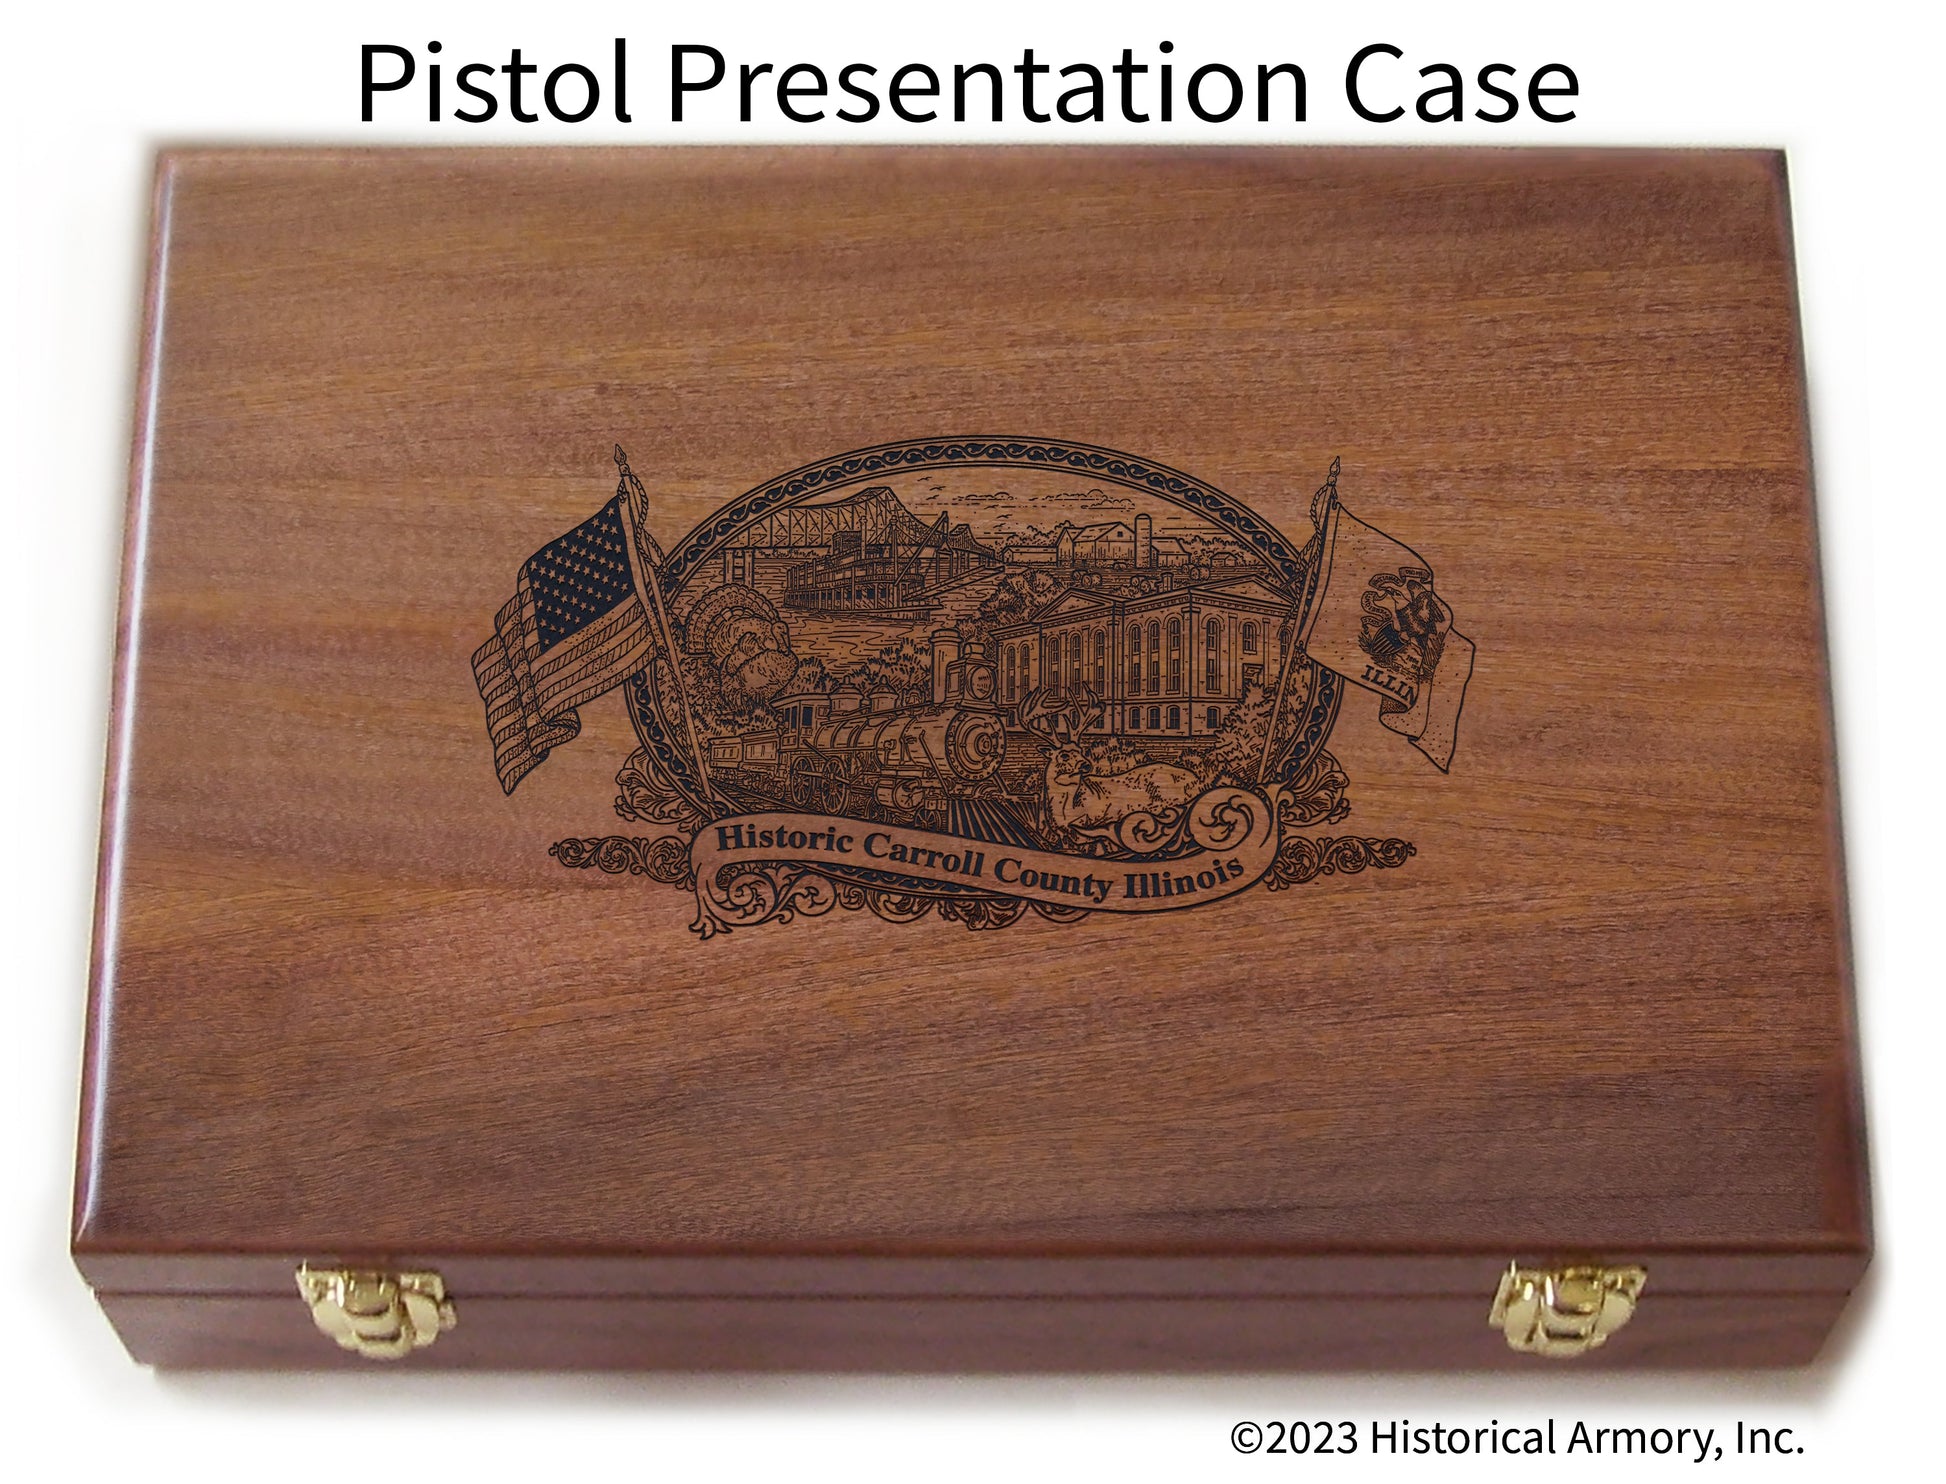 Carroll County Illinois Engraved .45 Auto Ruger 1911 Presentation Case